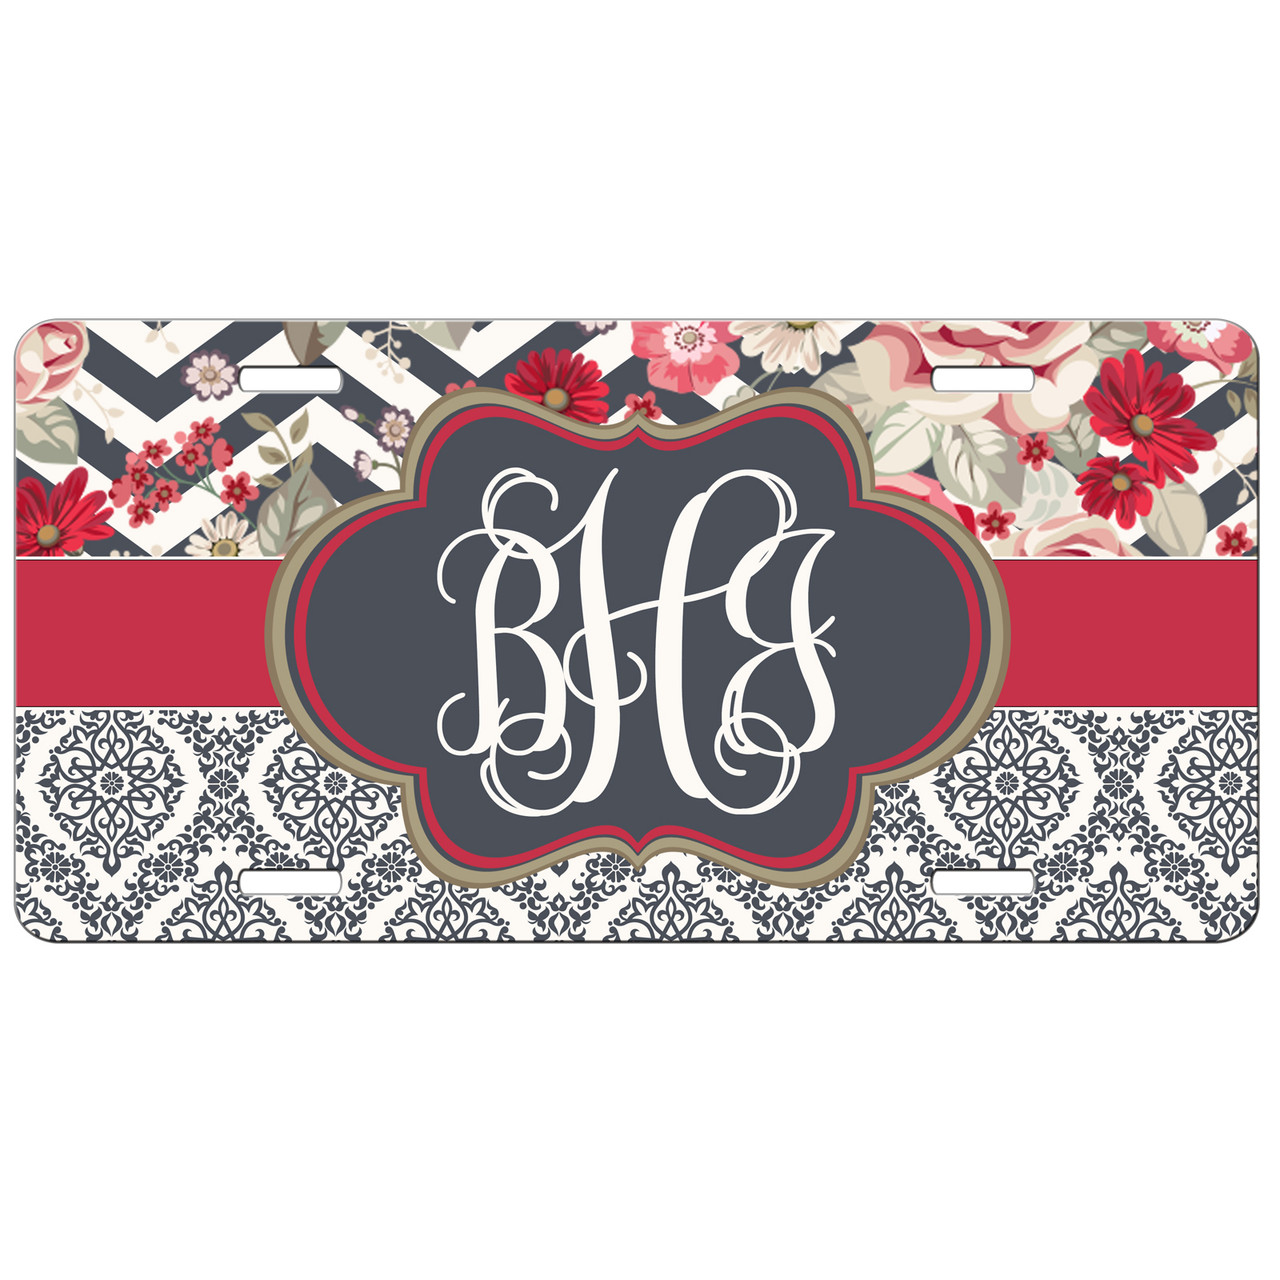 Paisley Personalized Monogrammed License Plate Car Tag Initials Custom Red